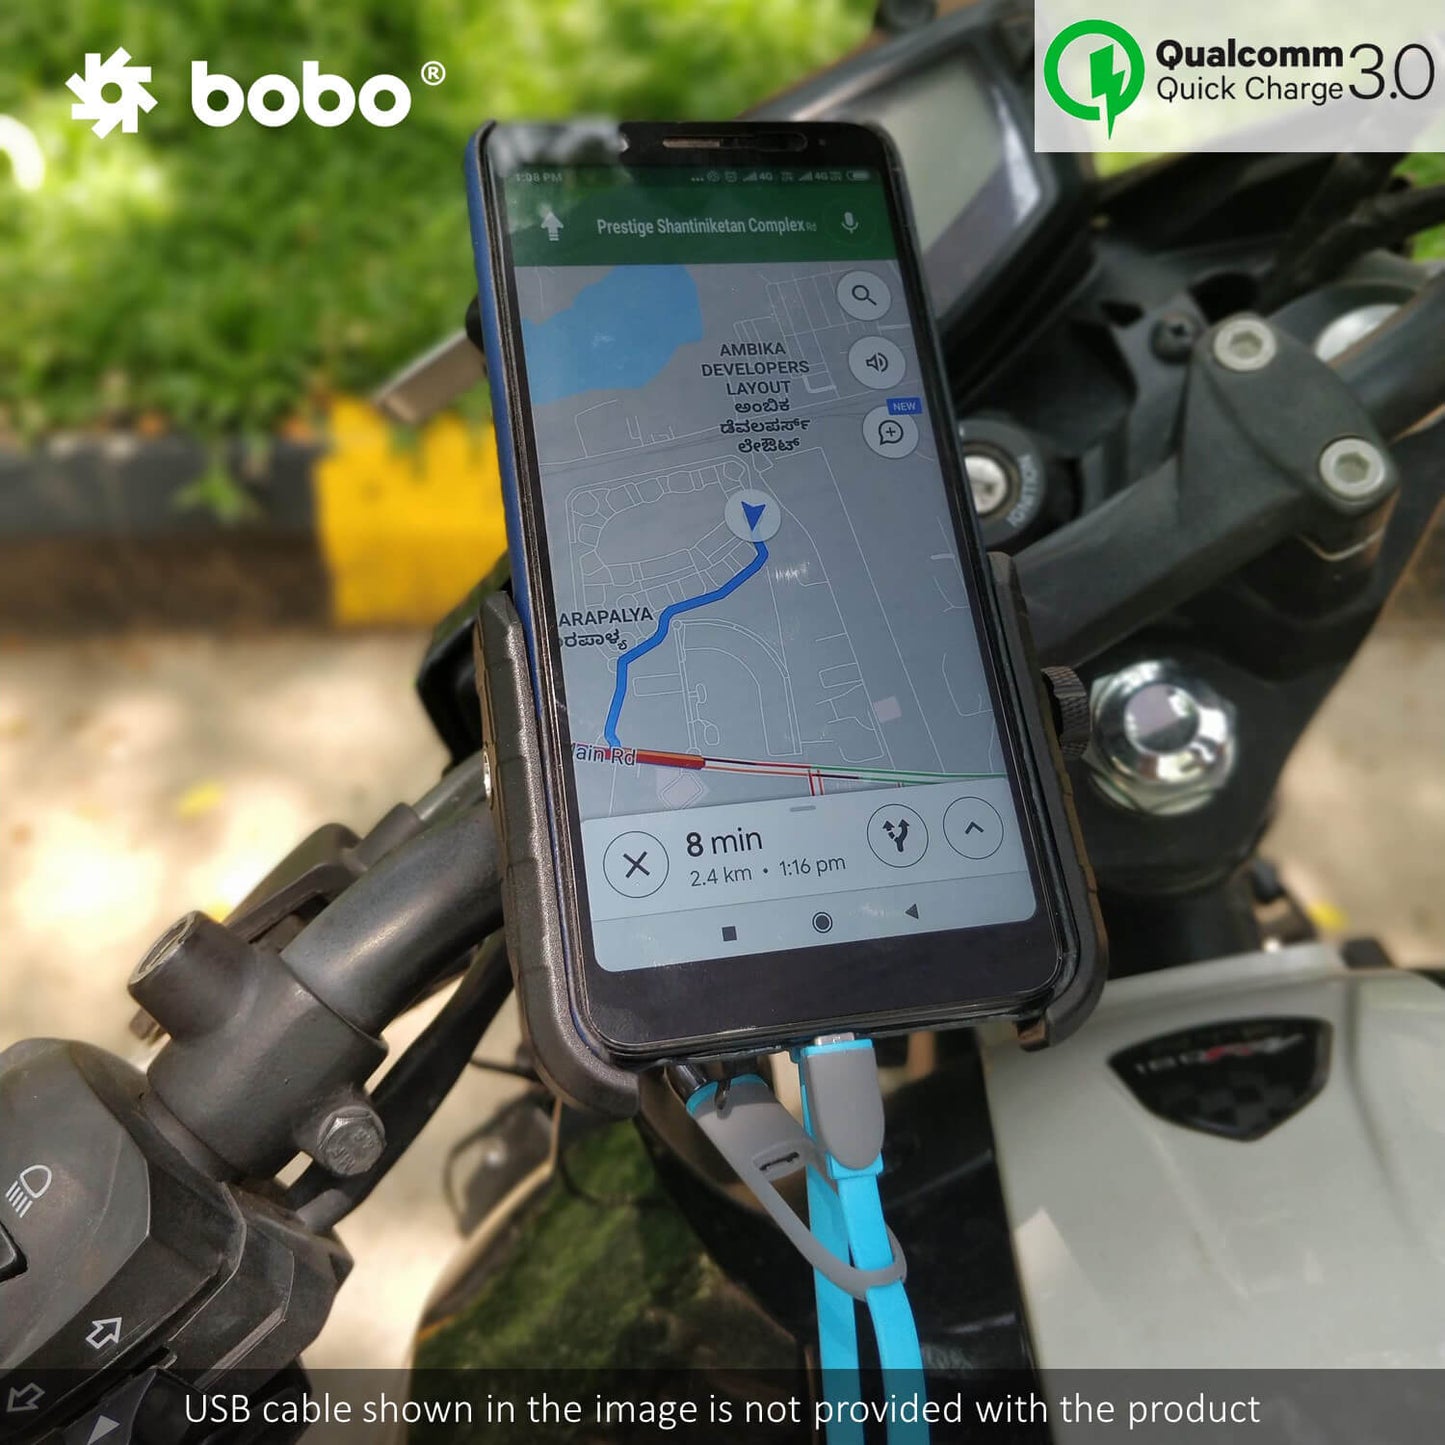 Bobo Gears BOBO BM1 Jaw-Grip Bike Phone Holder (with fast USB 3.0 charger) Motorcycle Mobile Mount